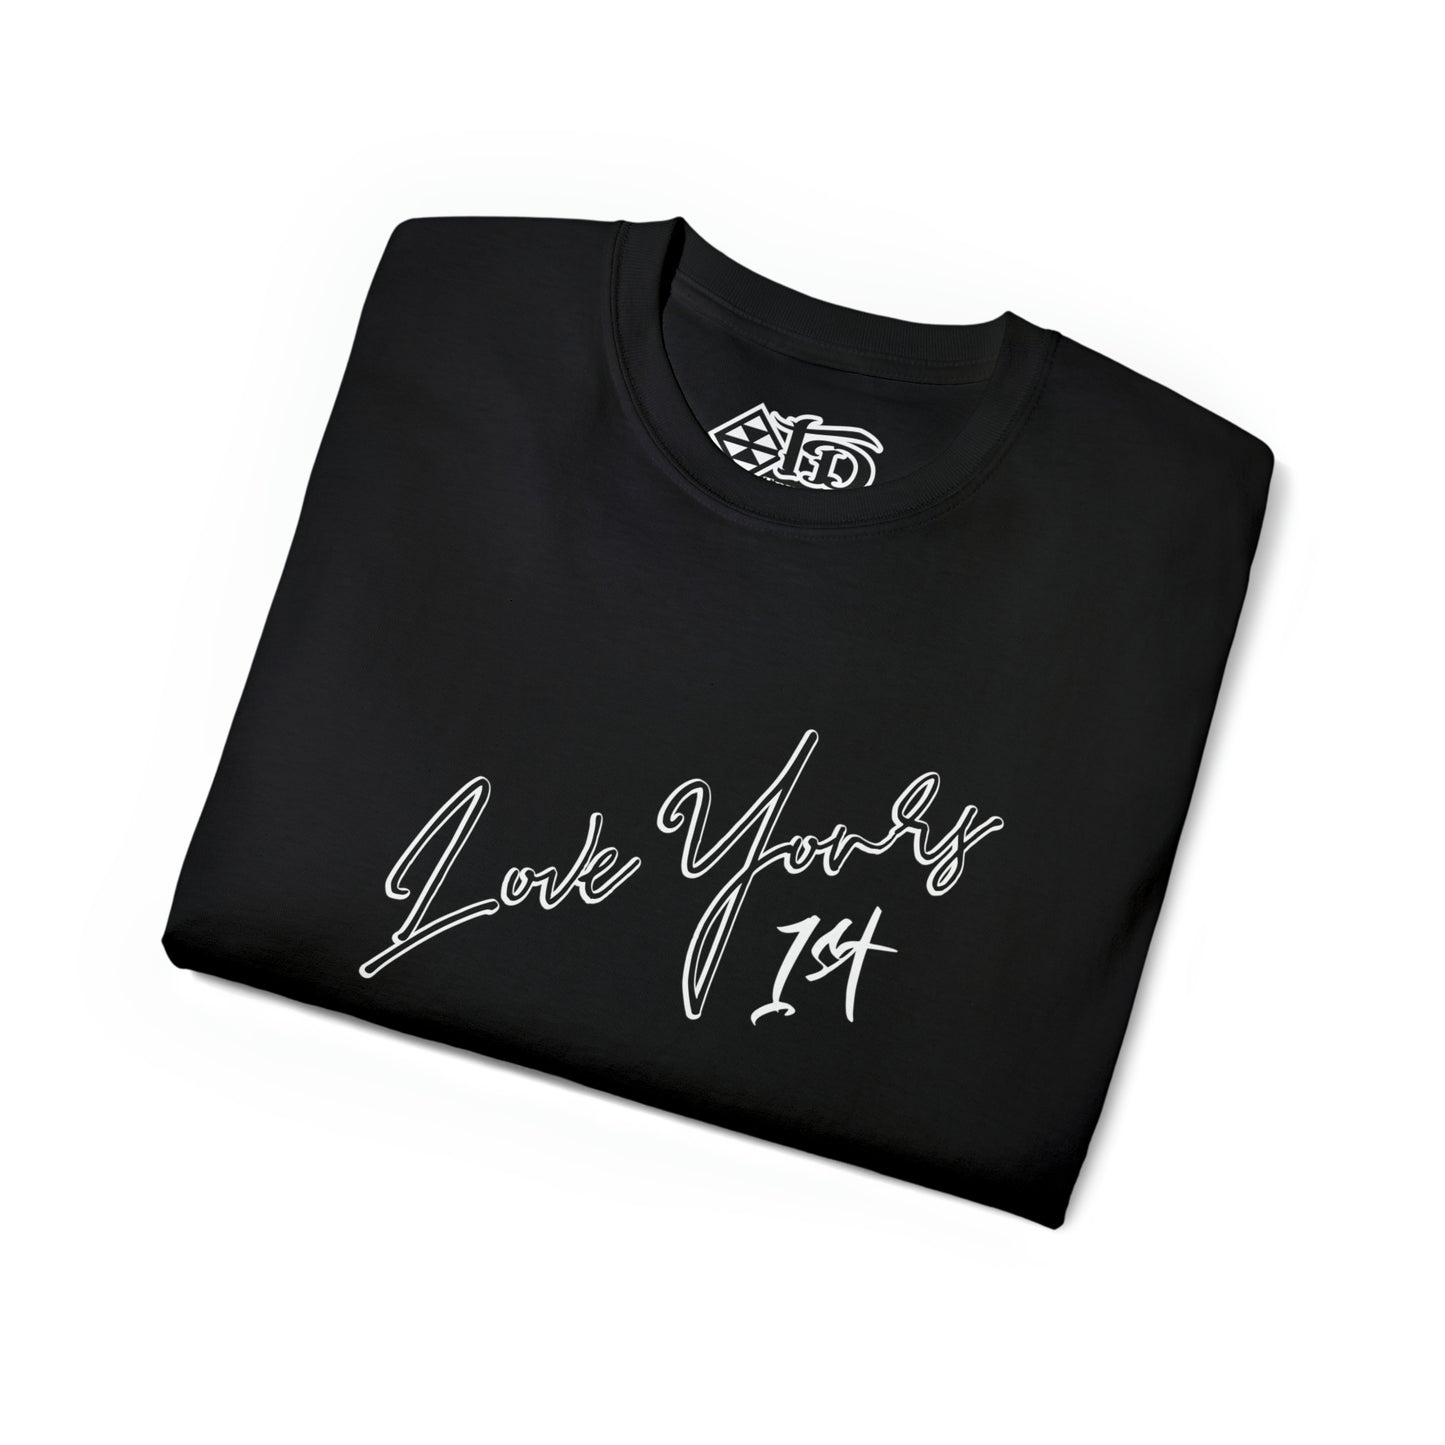 Love Yours 1st -  Ultra Cotton Tee